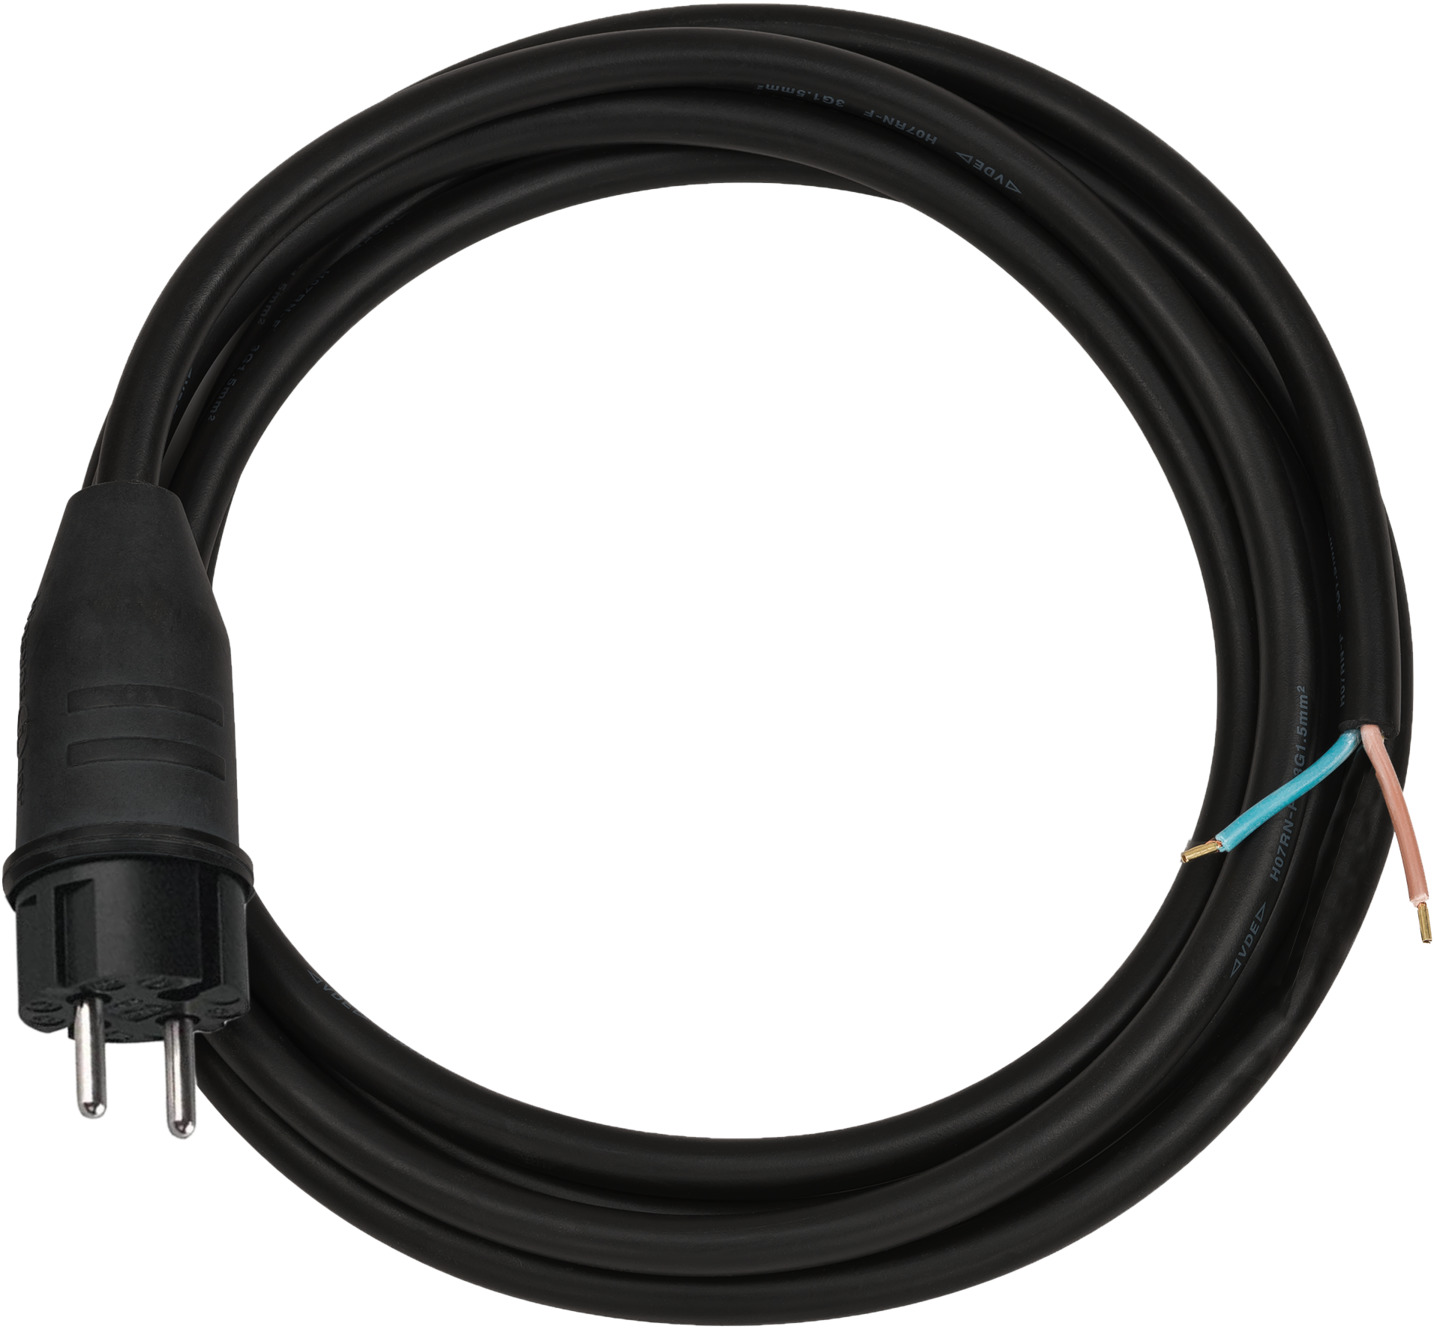 Connection cable 3m black H07RN-F 2x1,0